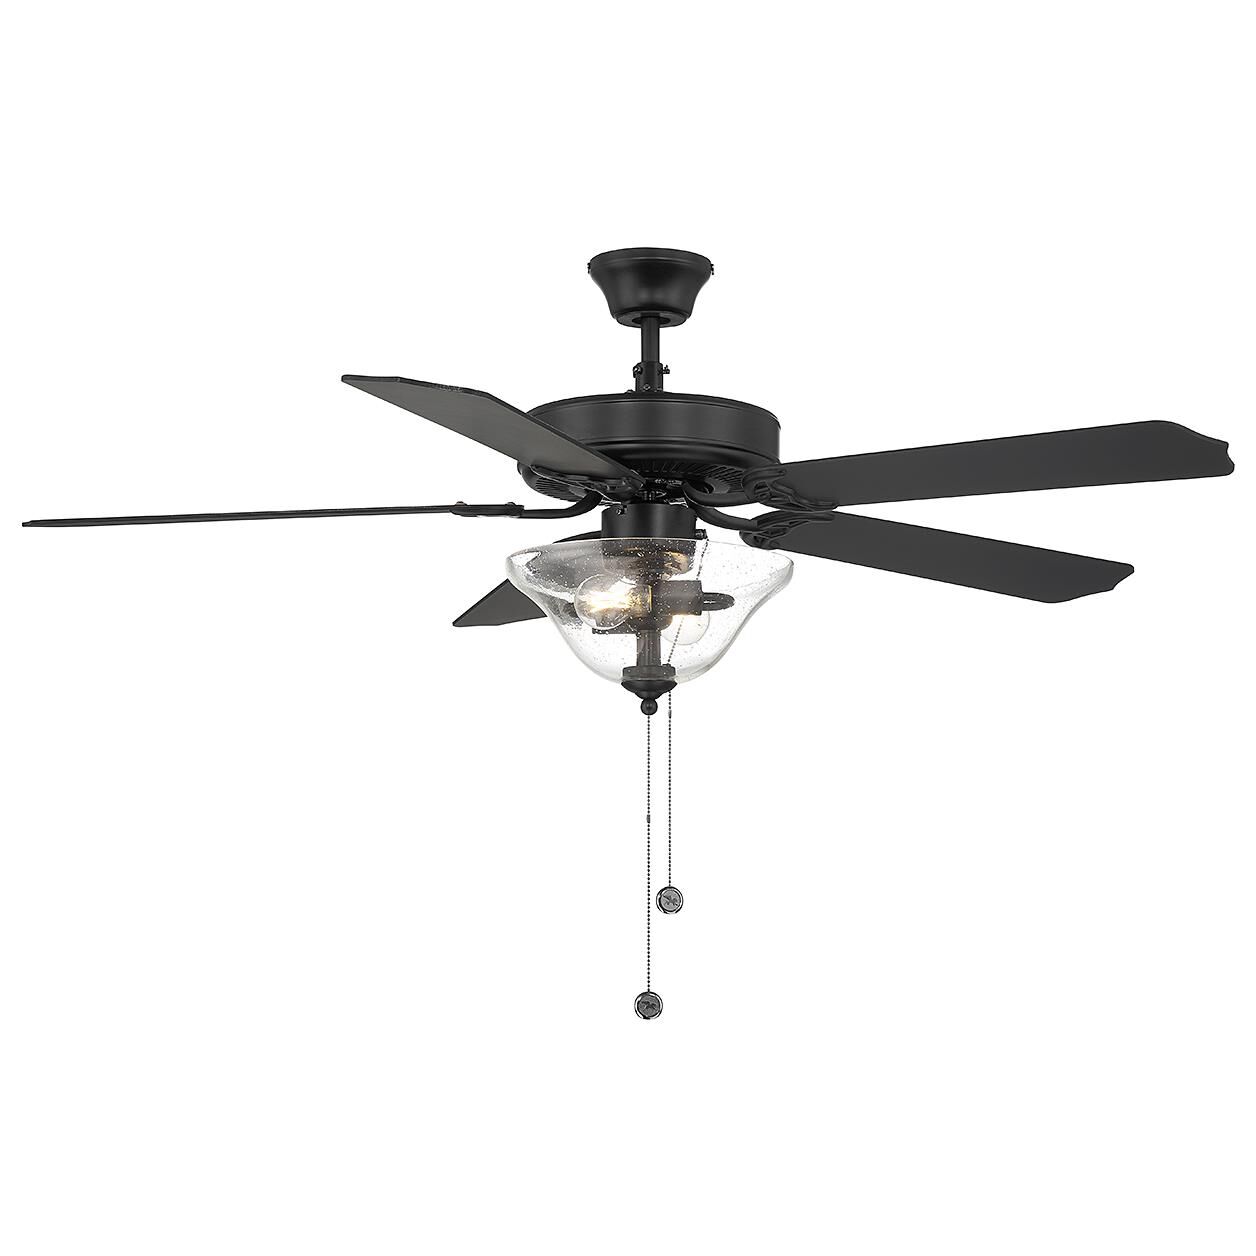 Photos - Fan Meridian Lighting 52 Inch Ceiling  with Light Kit - M2019MBKRV - Tradit